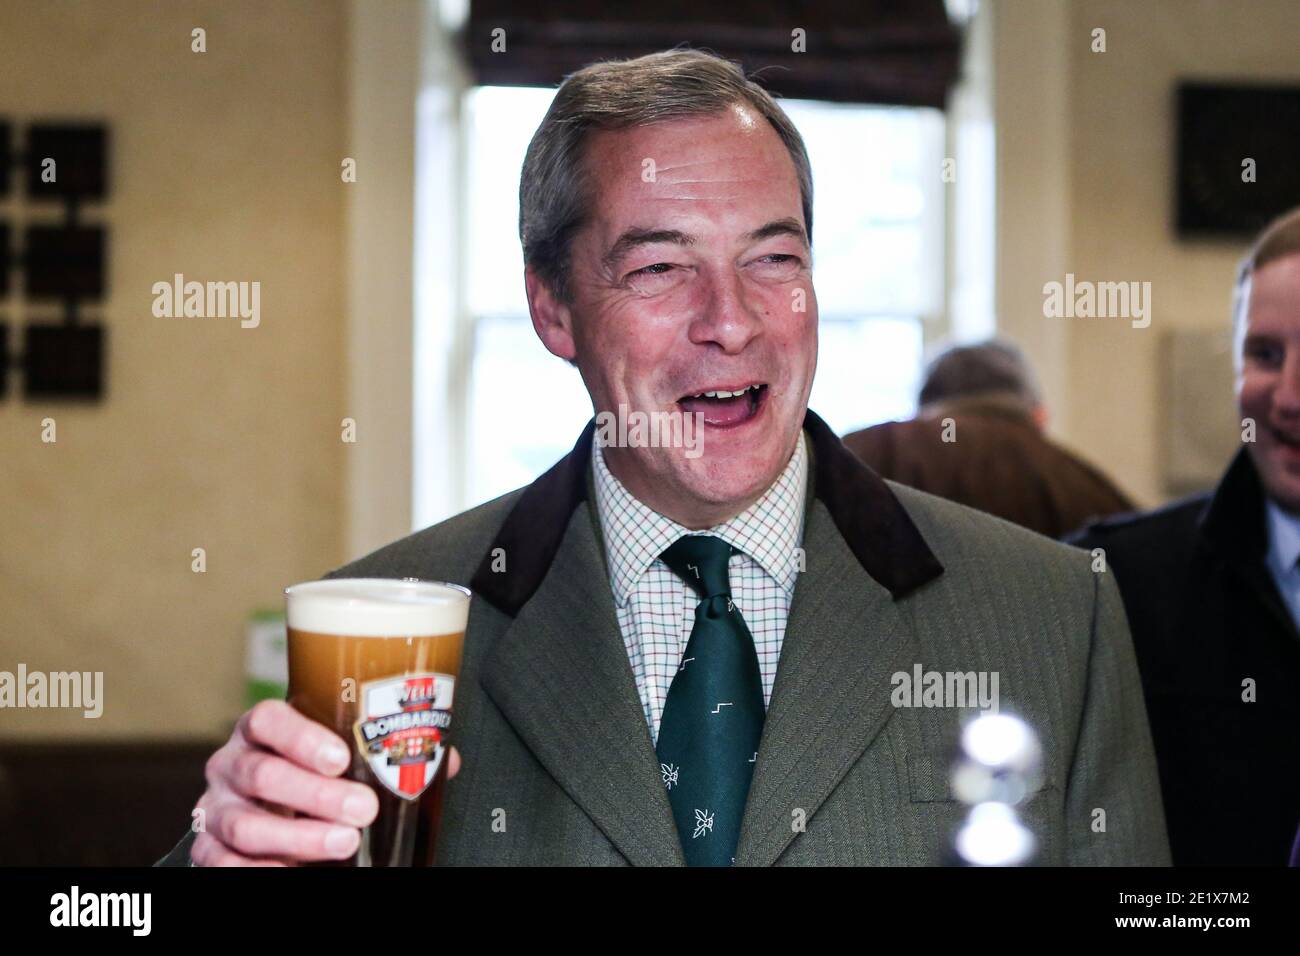 05/12/16. Sleaford, UK. Former UKIP leader Nigel Farage drinks a pint of beer in a pub in Sleaford, Lincolnshire, with Victoria Ayling, UKIP's candida Stock Photo